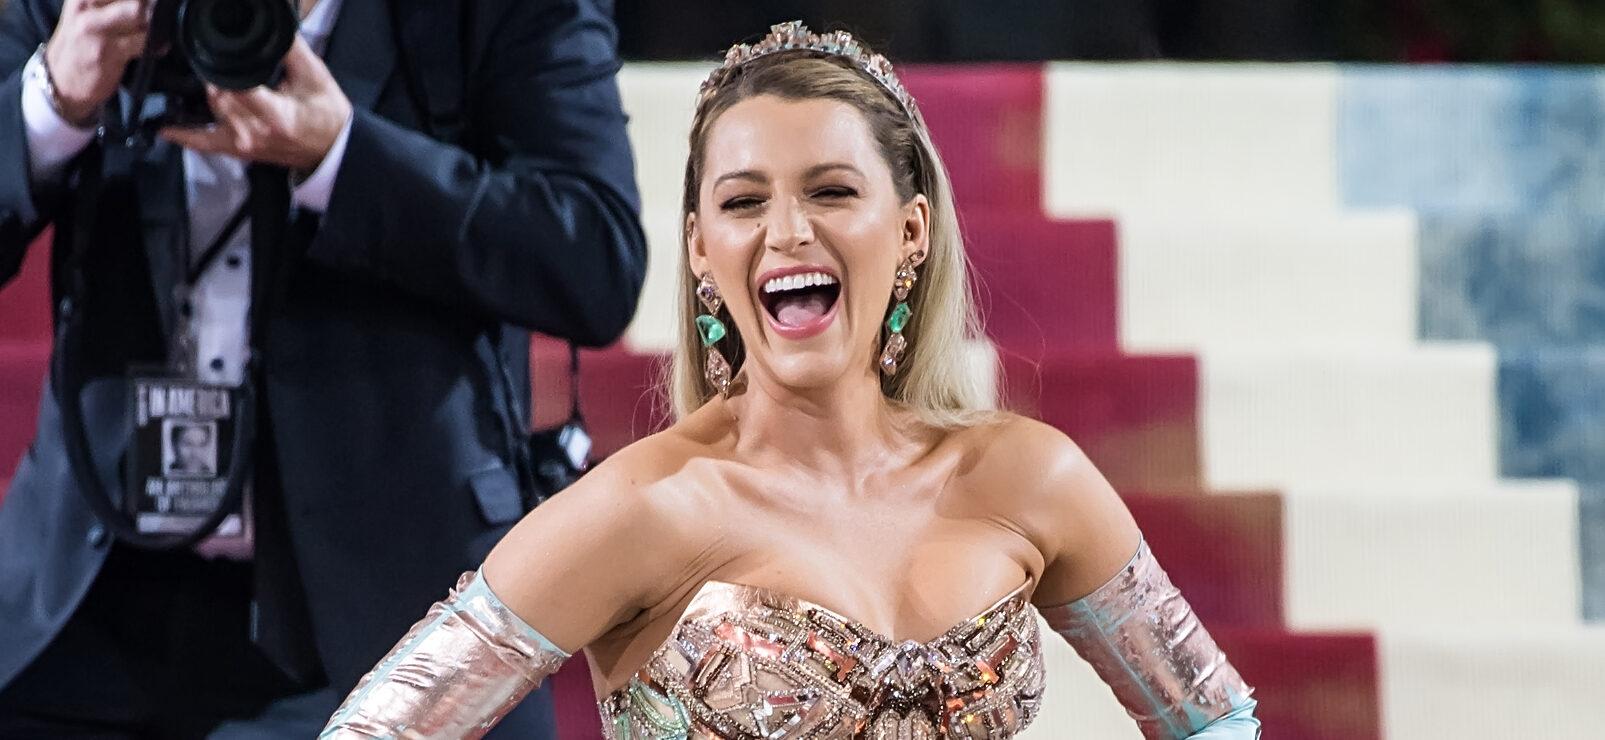 Blake Lively Slammed For ‘Money Grab’ After Launching Alcoholic Line As A Non-Drinker